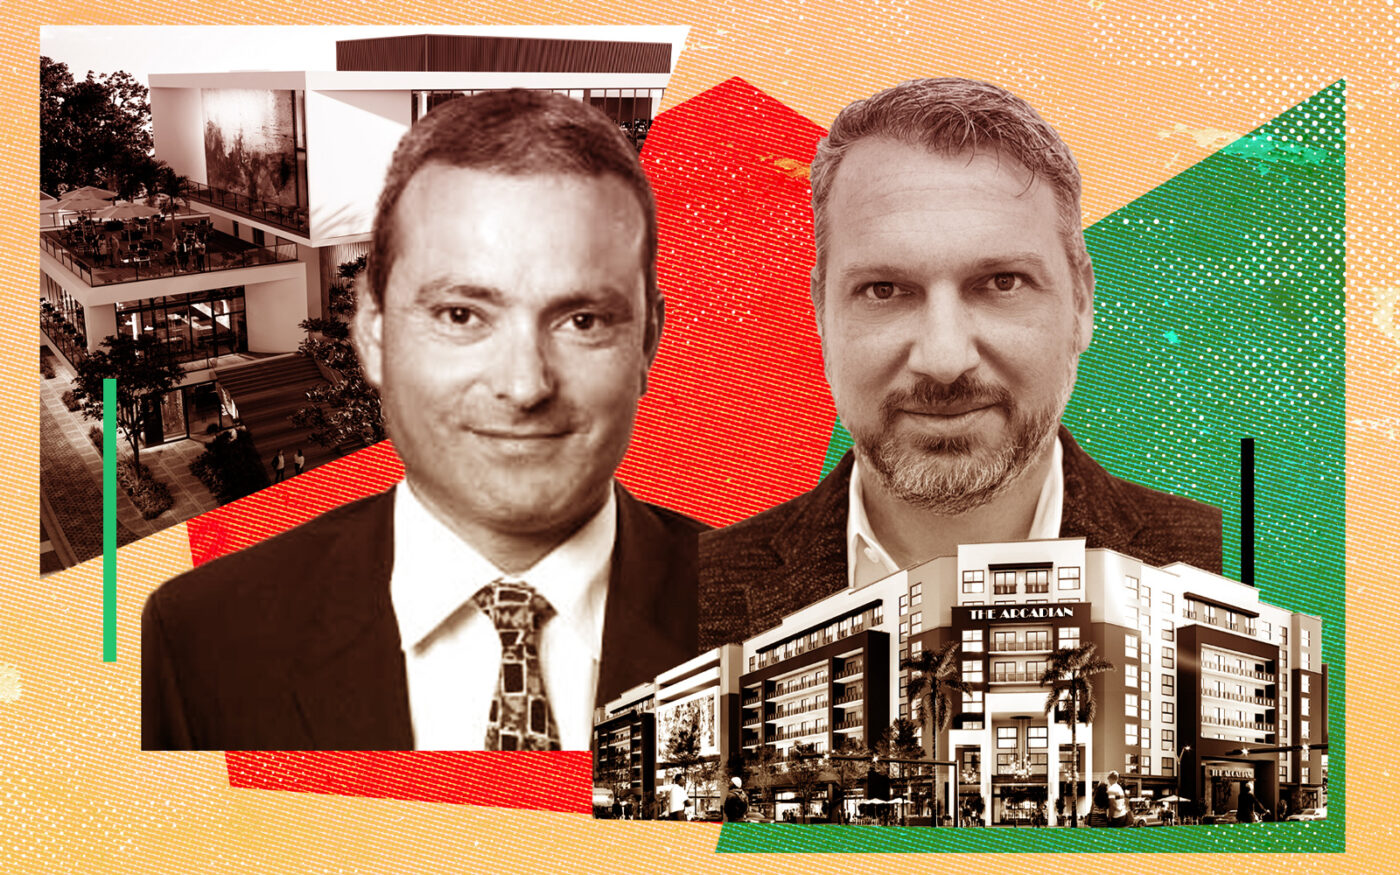 Fuse Group Investment Companies' Shimon Elkabetz and Eyal Peretz with a rendering of 909 Sistrunk Boulevard and The Arcadian